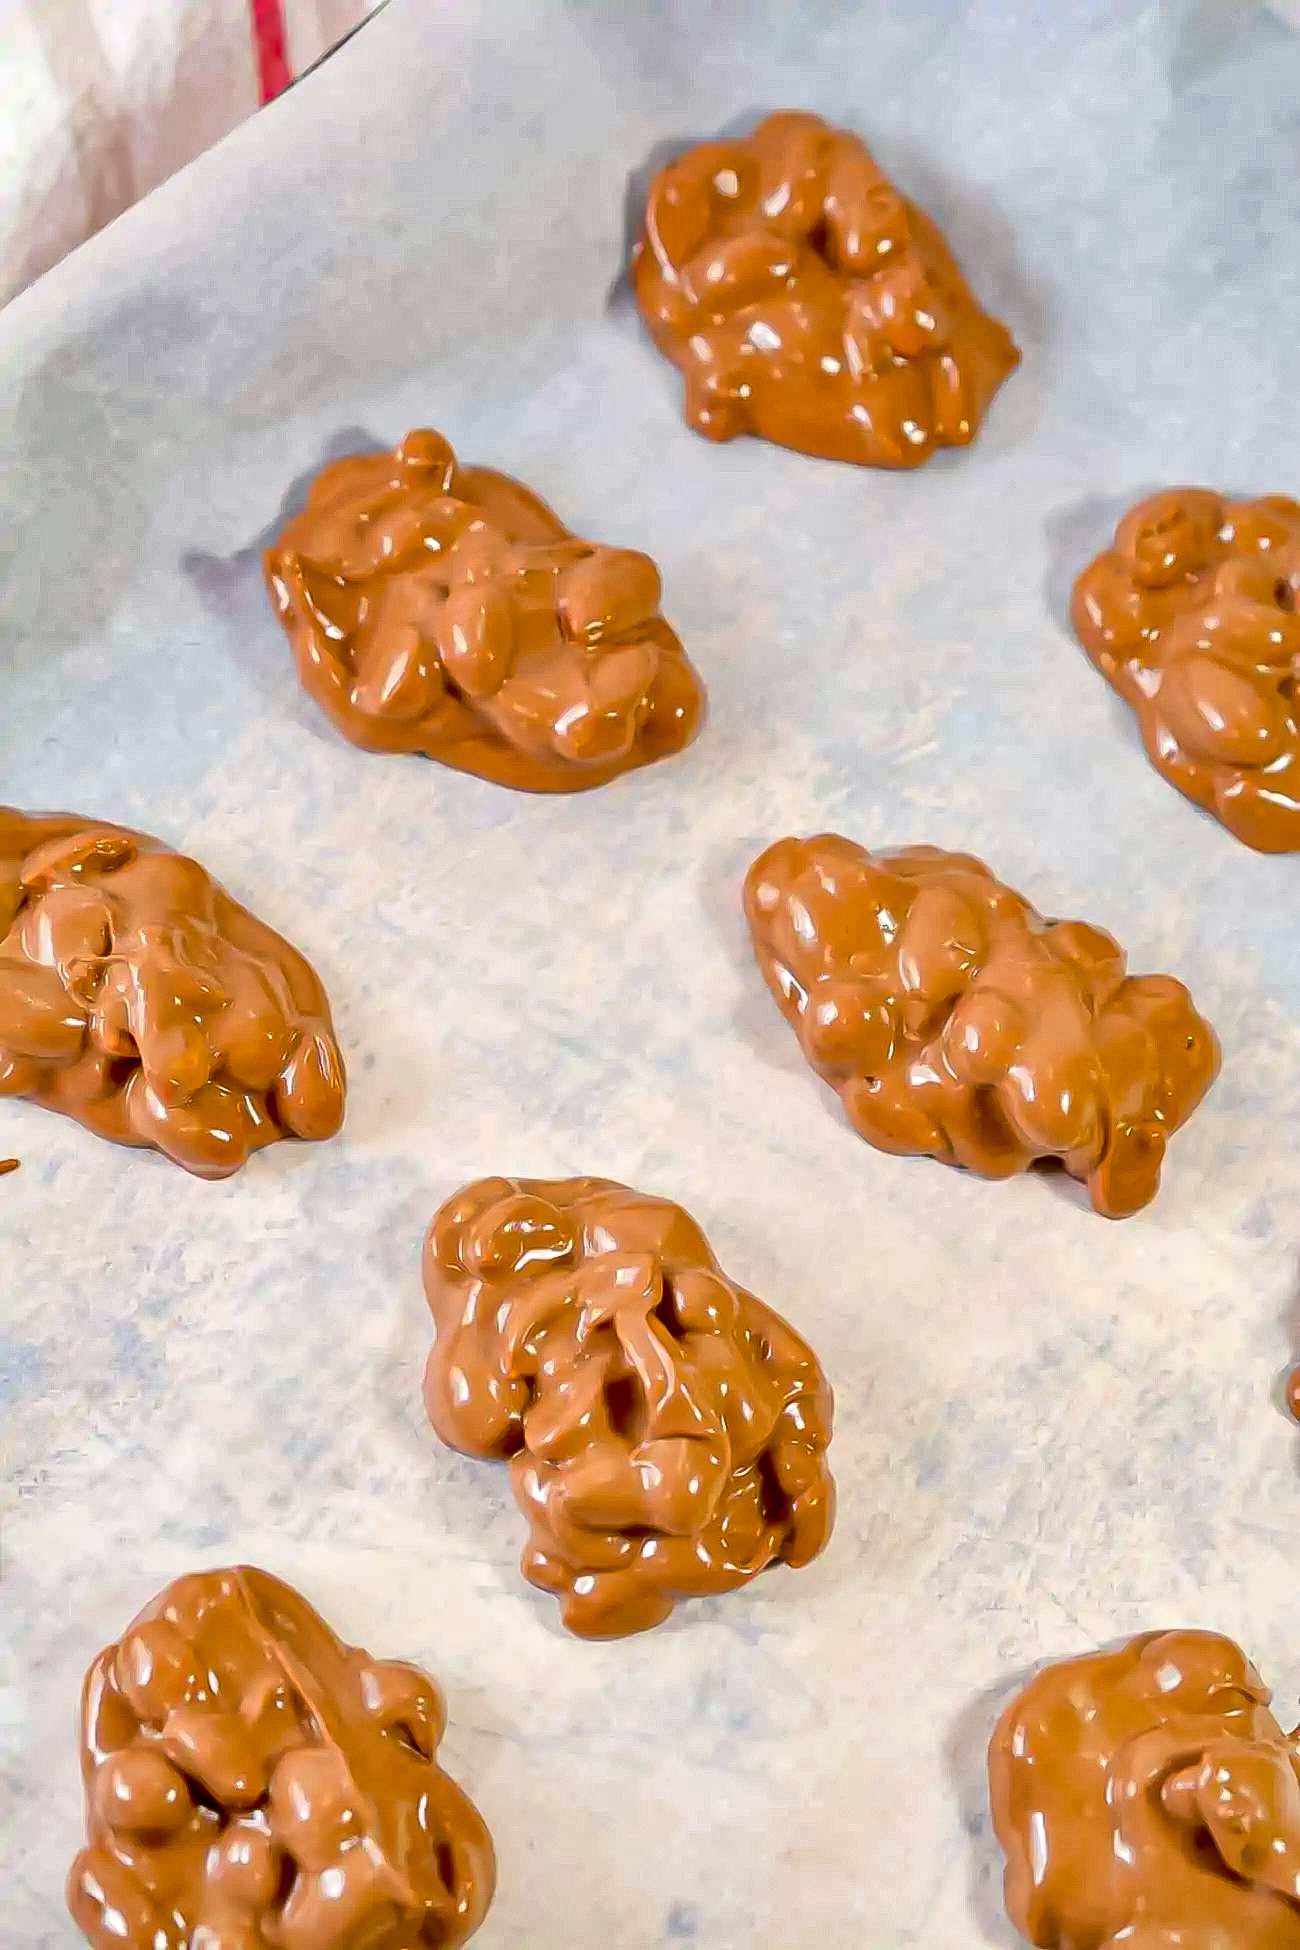 Allow the candy clusters to harden and set for several hours.